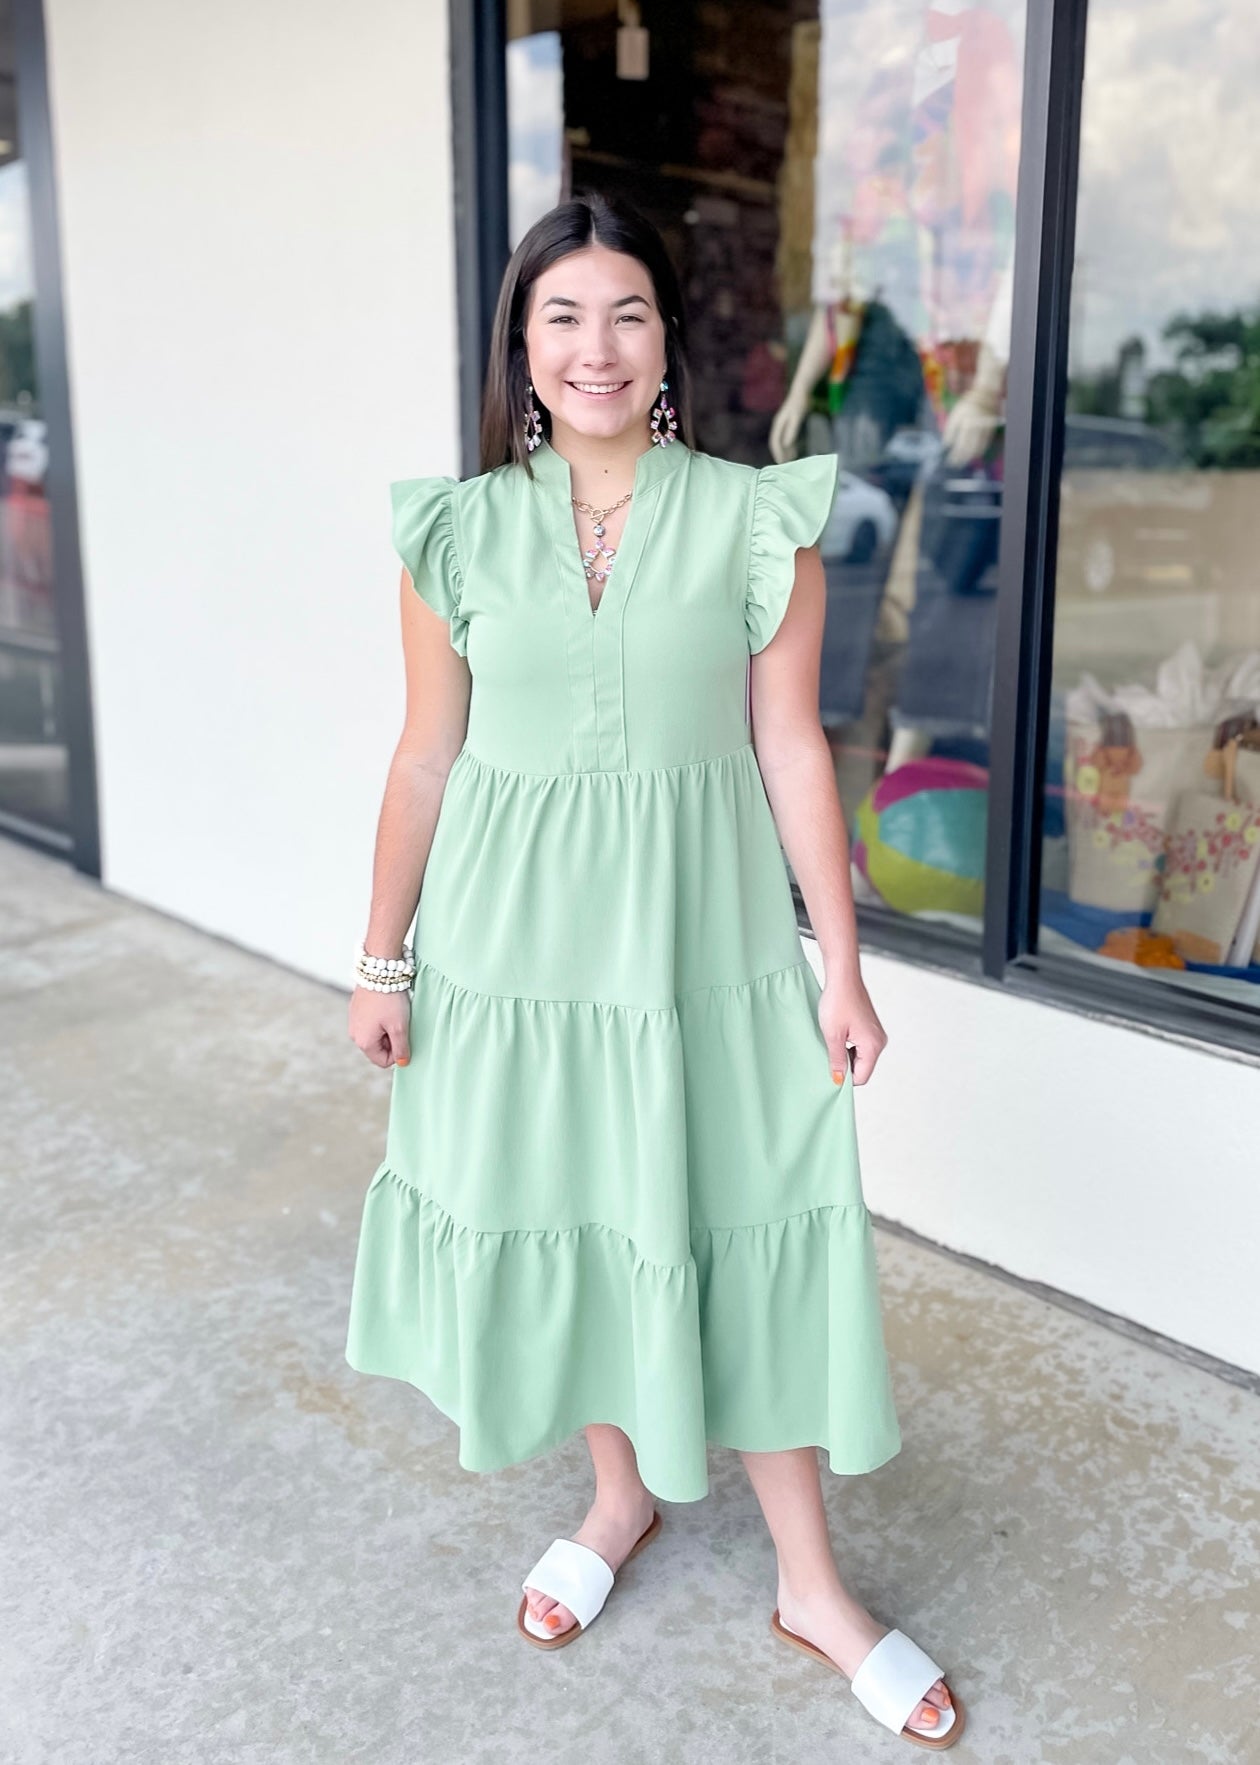 Magnolia Morning Ruffle Cap Sleeve Tiered Midi Dress in Sage Green - Giddy Up Glamour Boutique